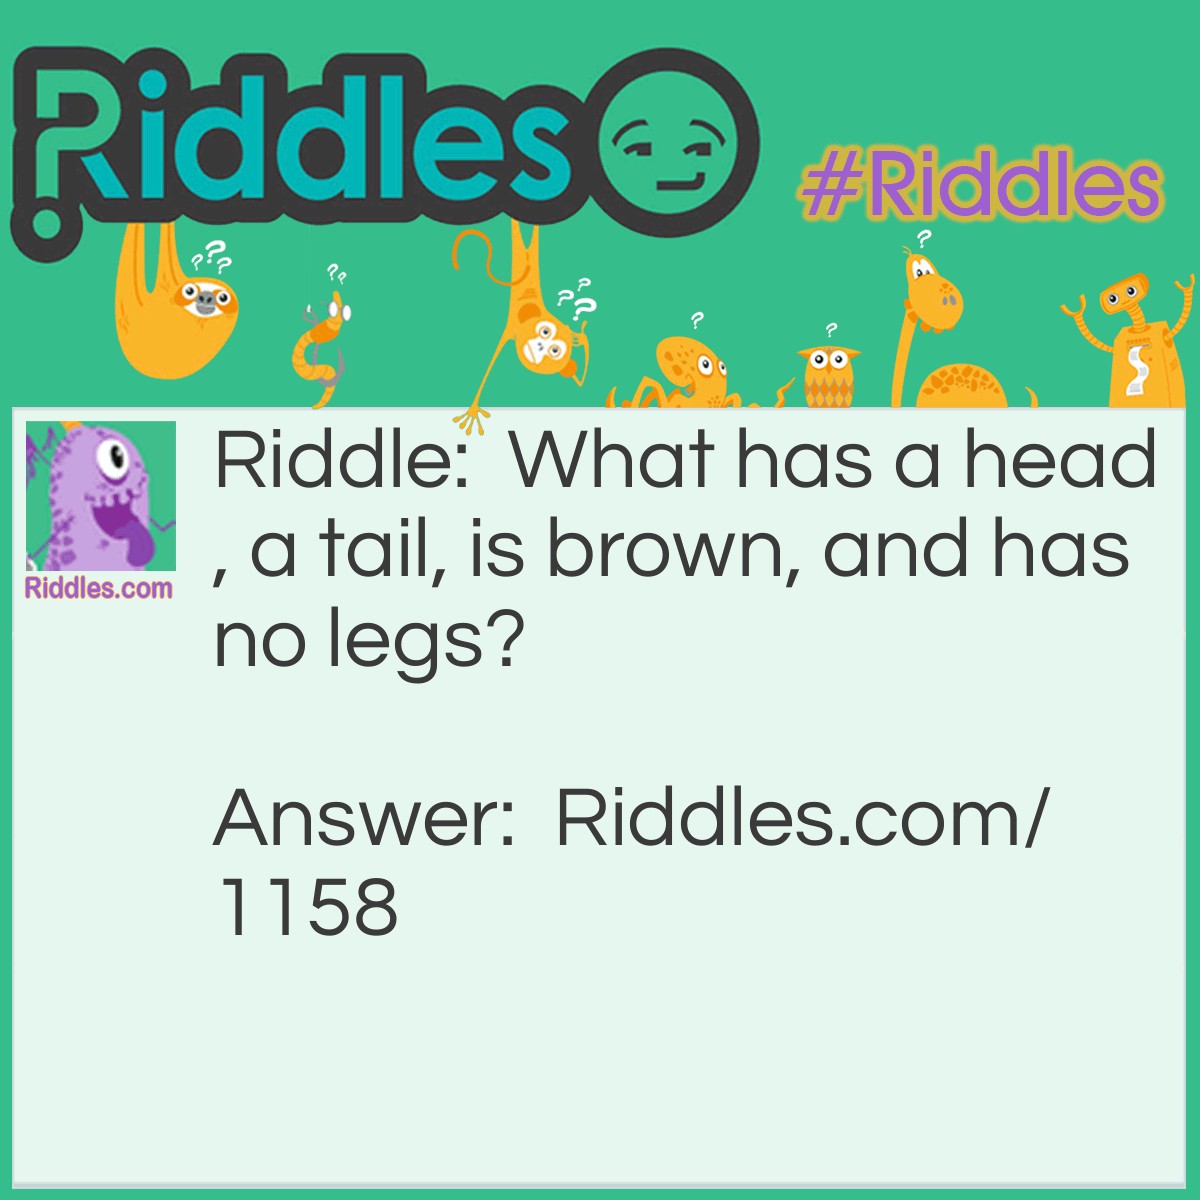 Riddle: What has a head, a tail, is brown, and has no legs? Answer: A penny.